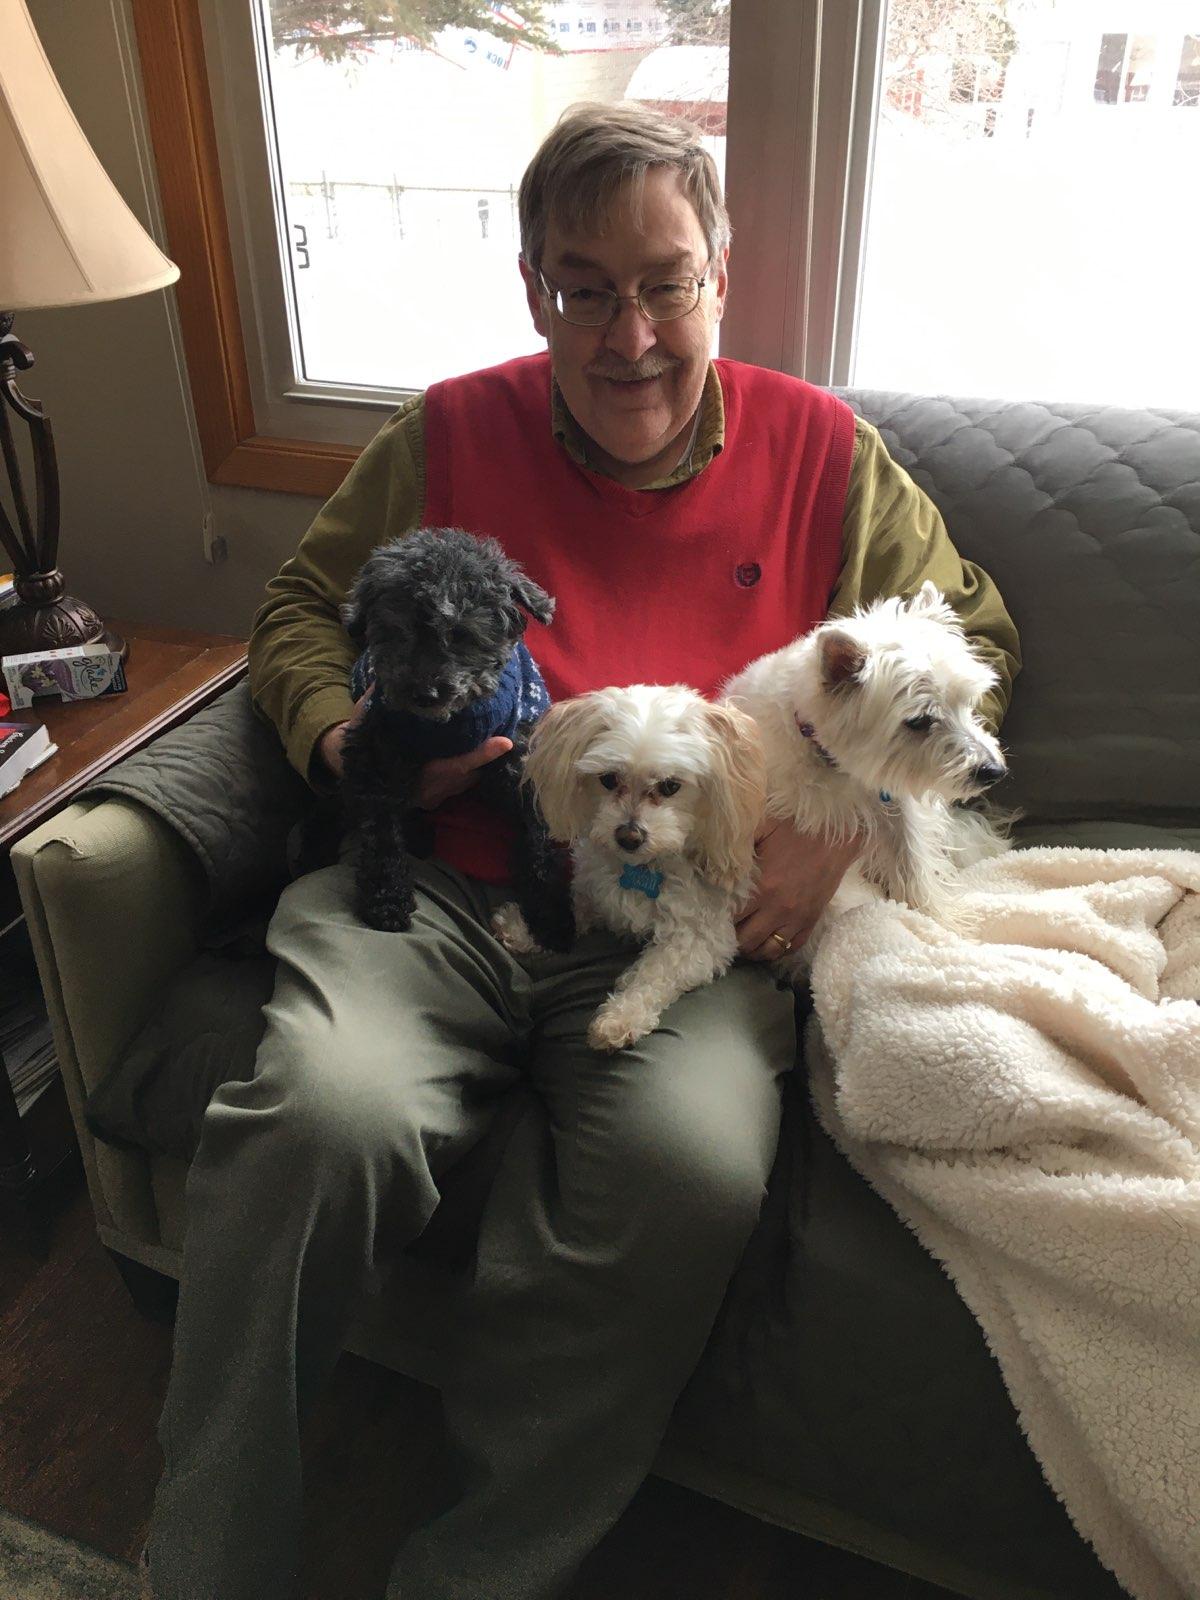 An older man sits on a couch with four small dogs in his lap.